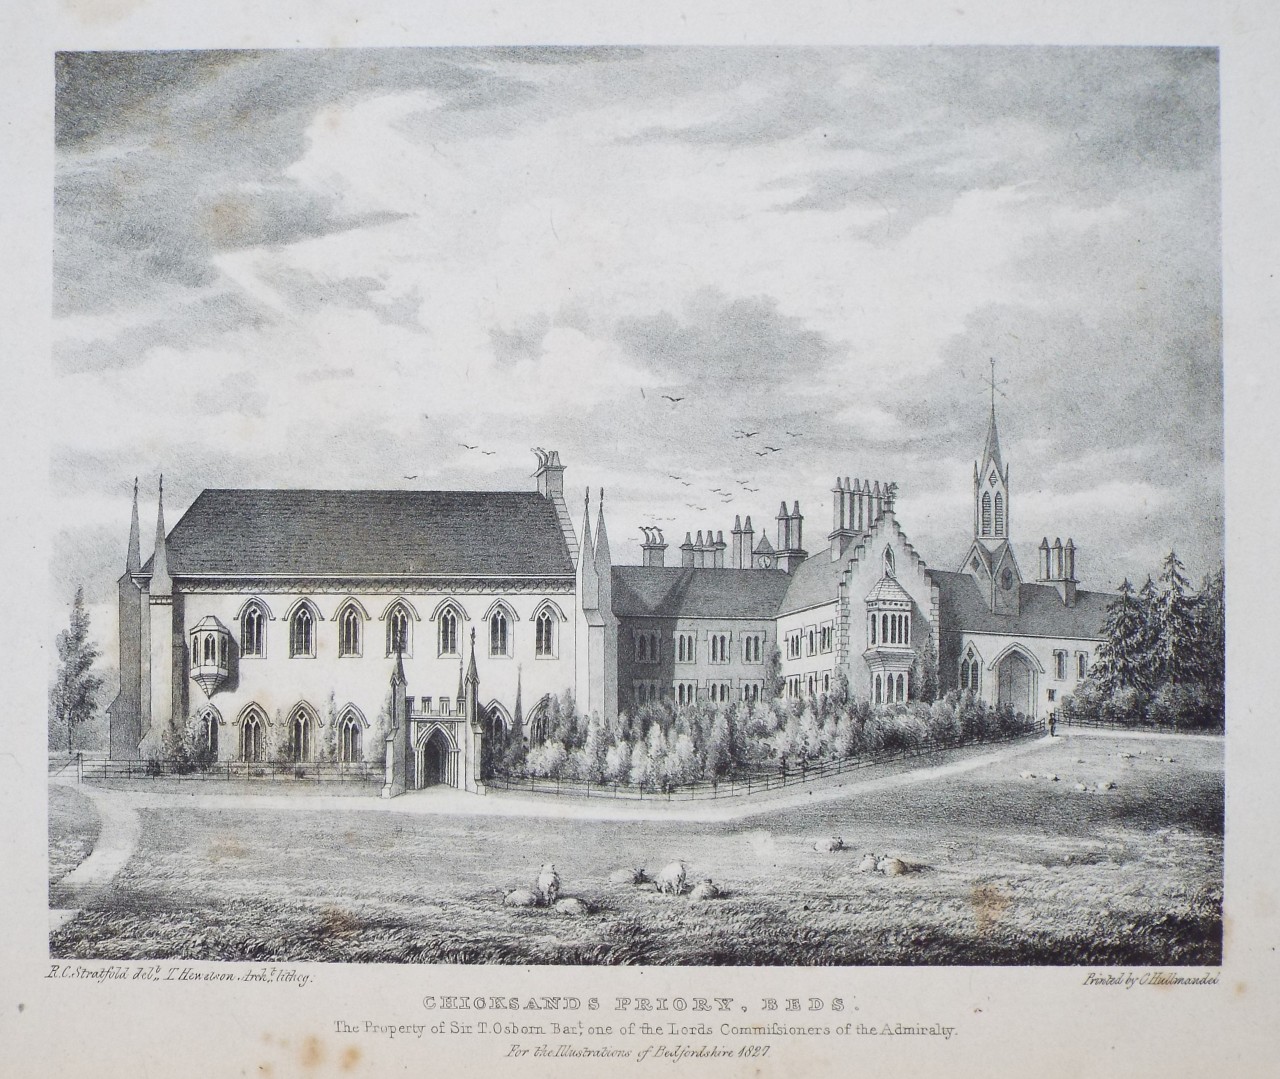 Lithograph - Chicksands Priory, Beds. The Property of Sir T. Osborn Bart, one of the Lords Commissioners of the Admiralty. - Hewitson